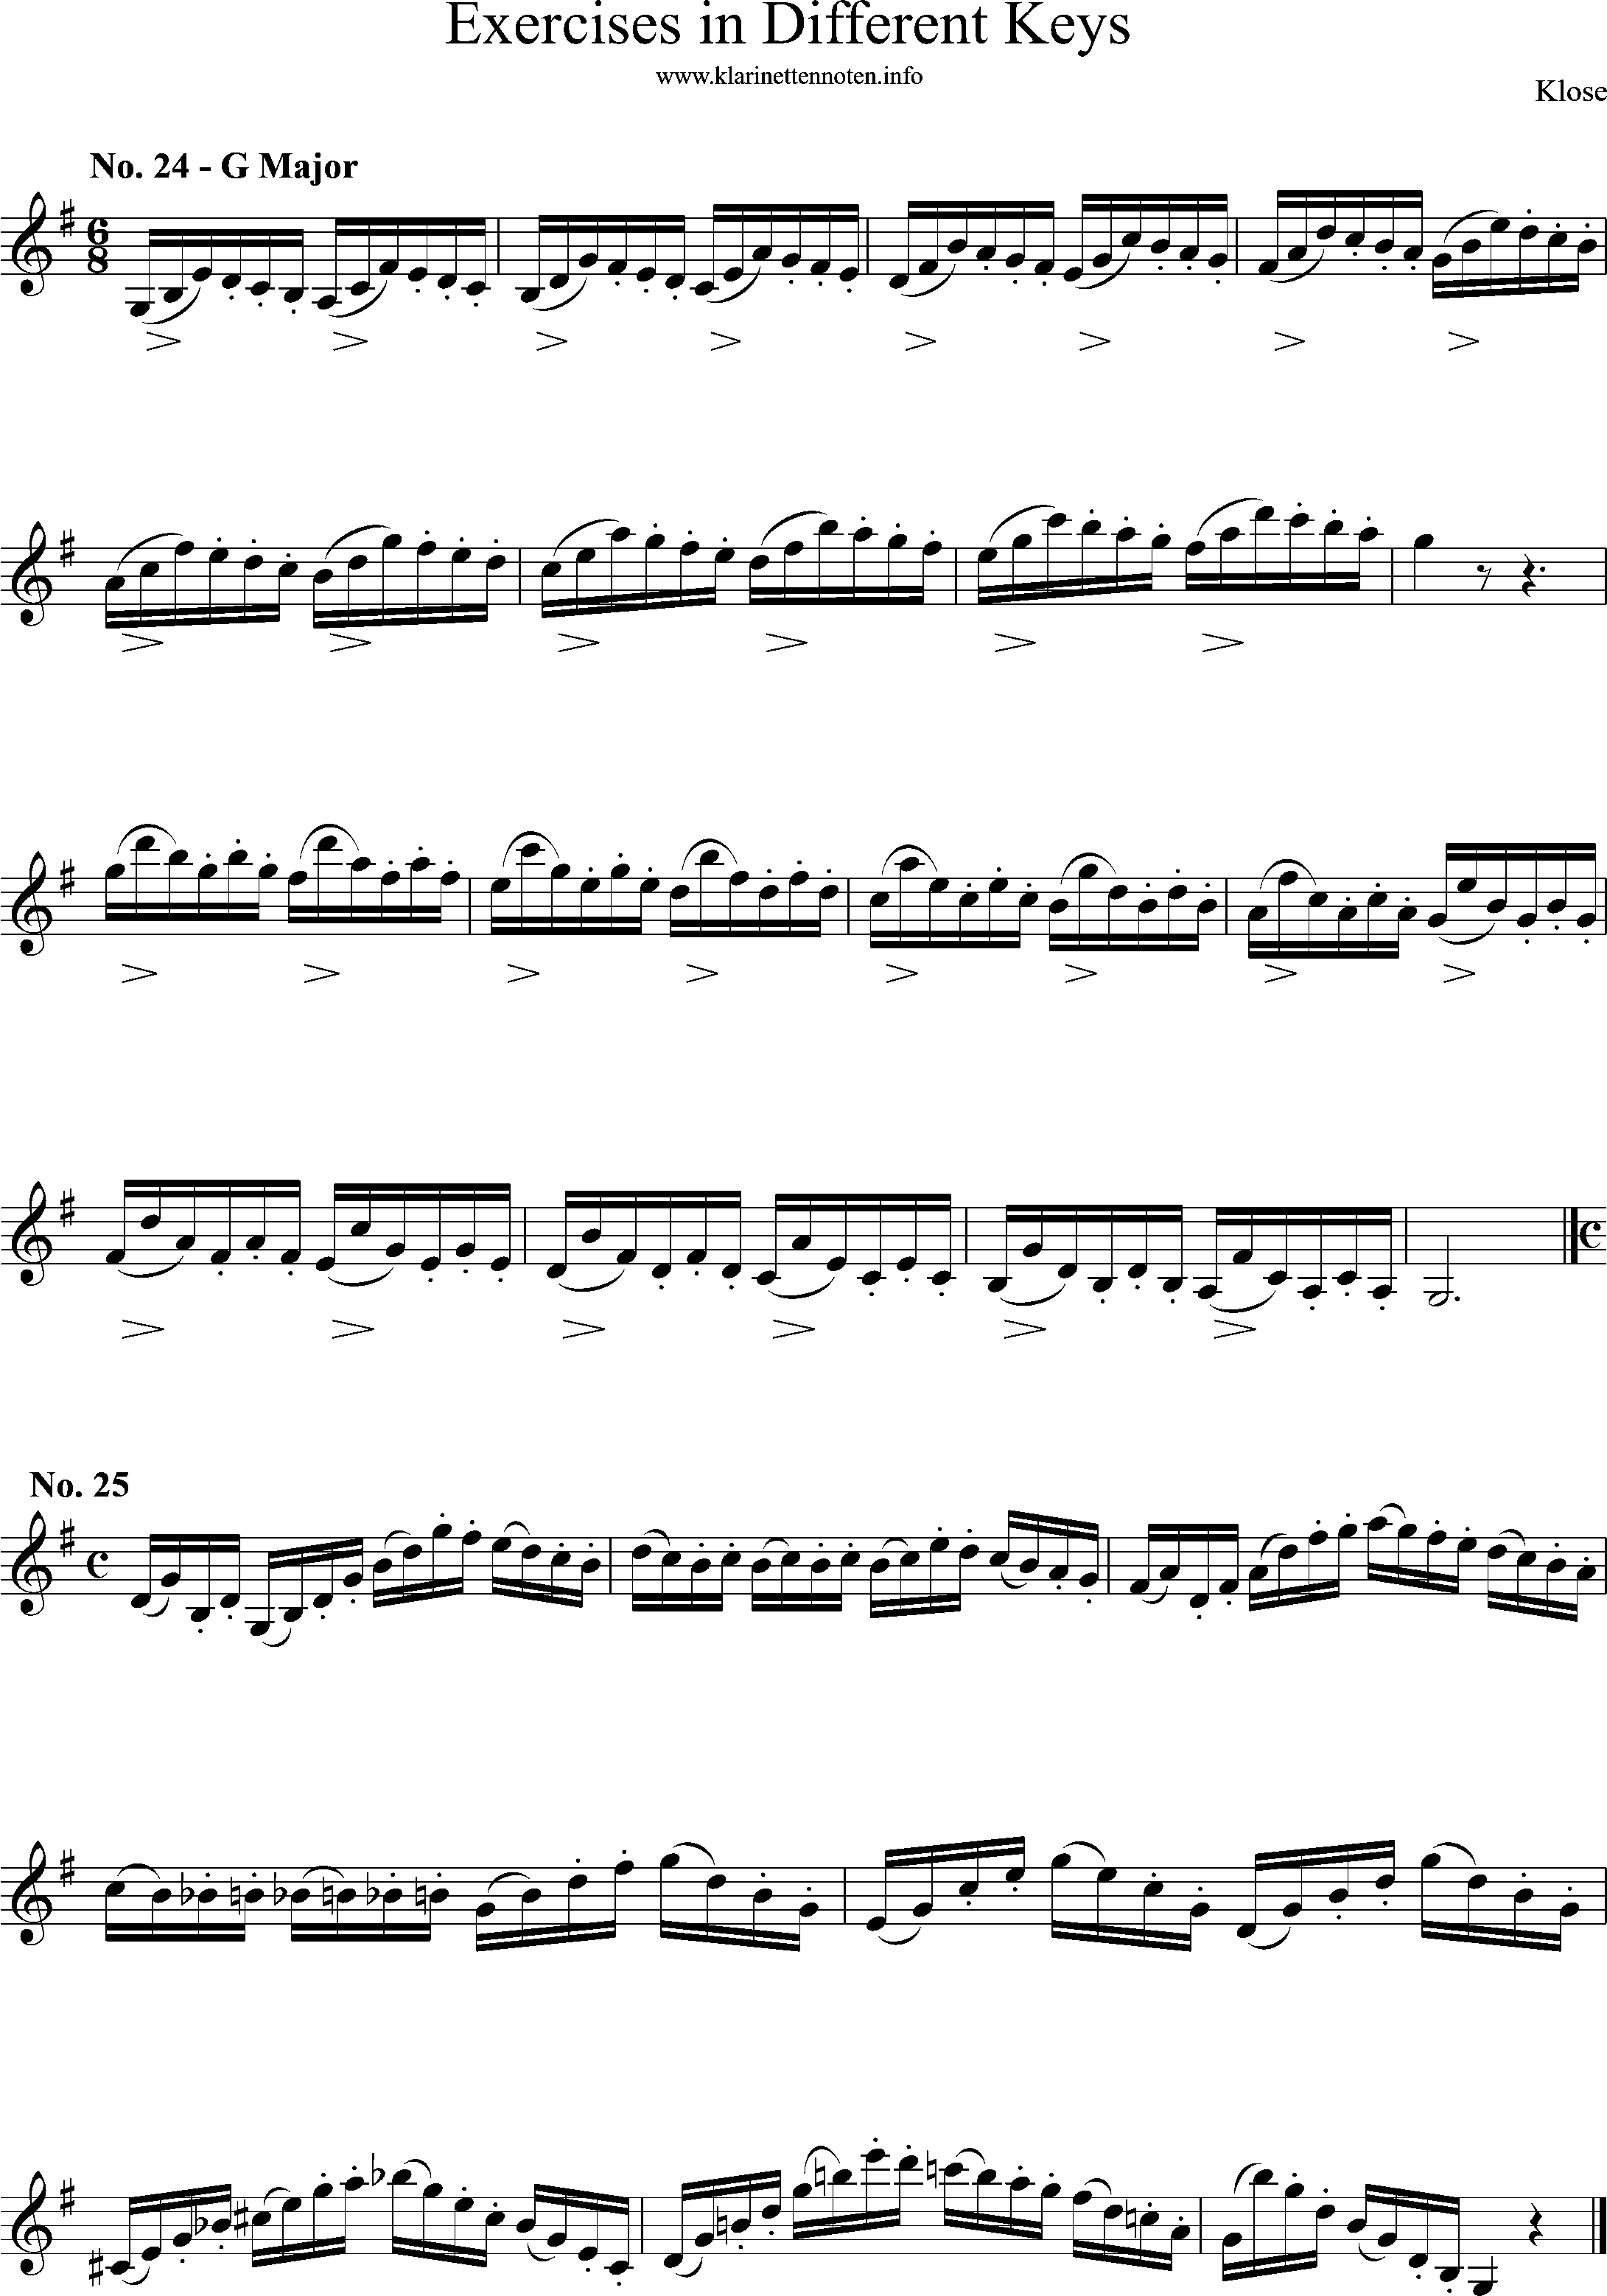 Exercises in Differewnt Keys, klose, No-24-25, G-Major